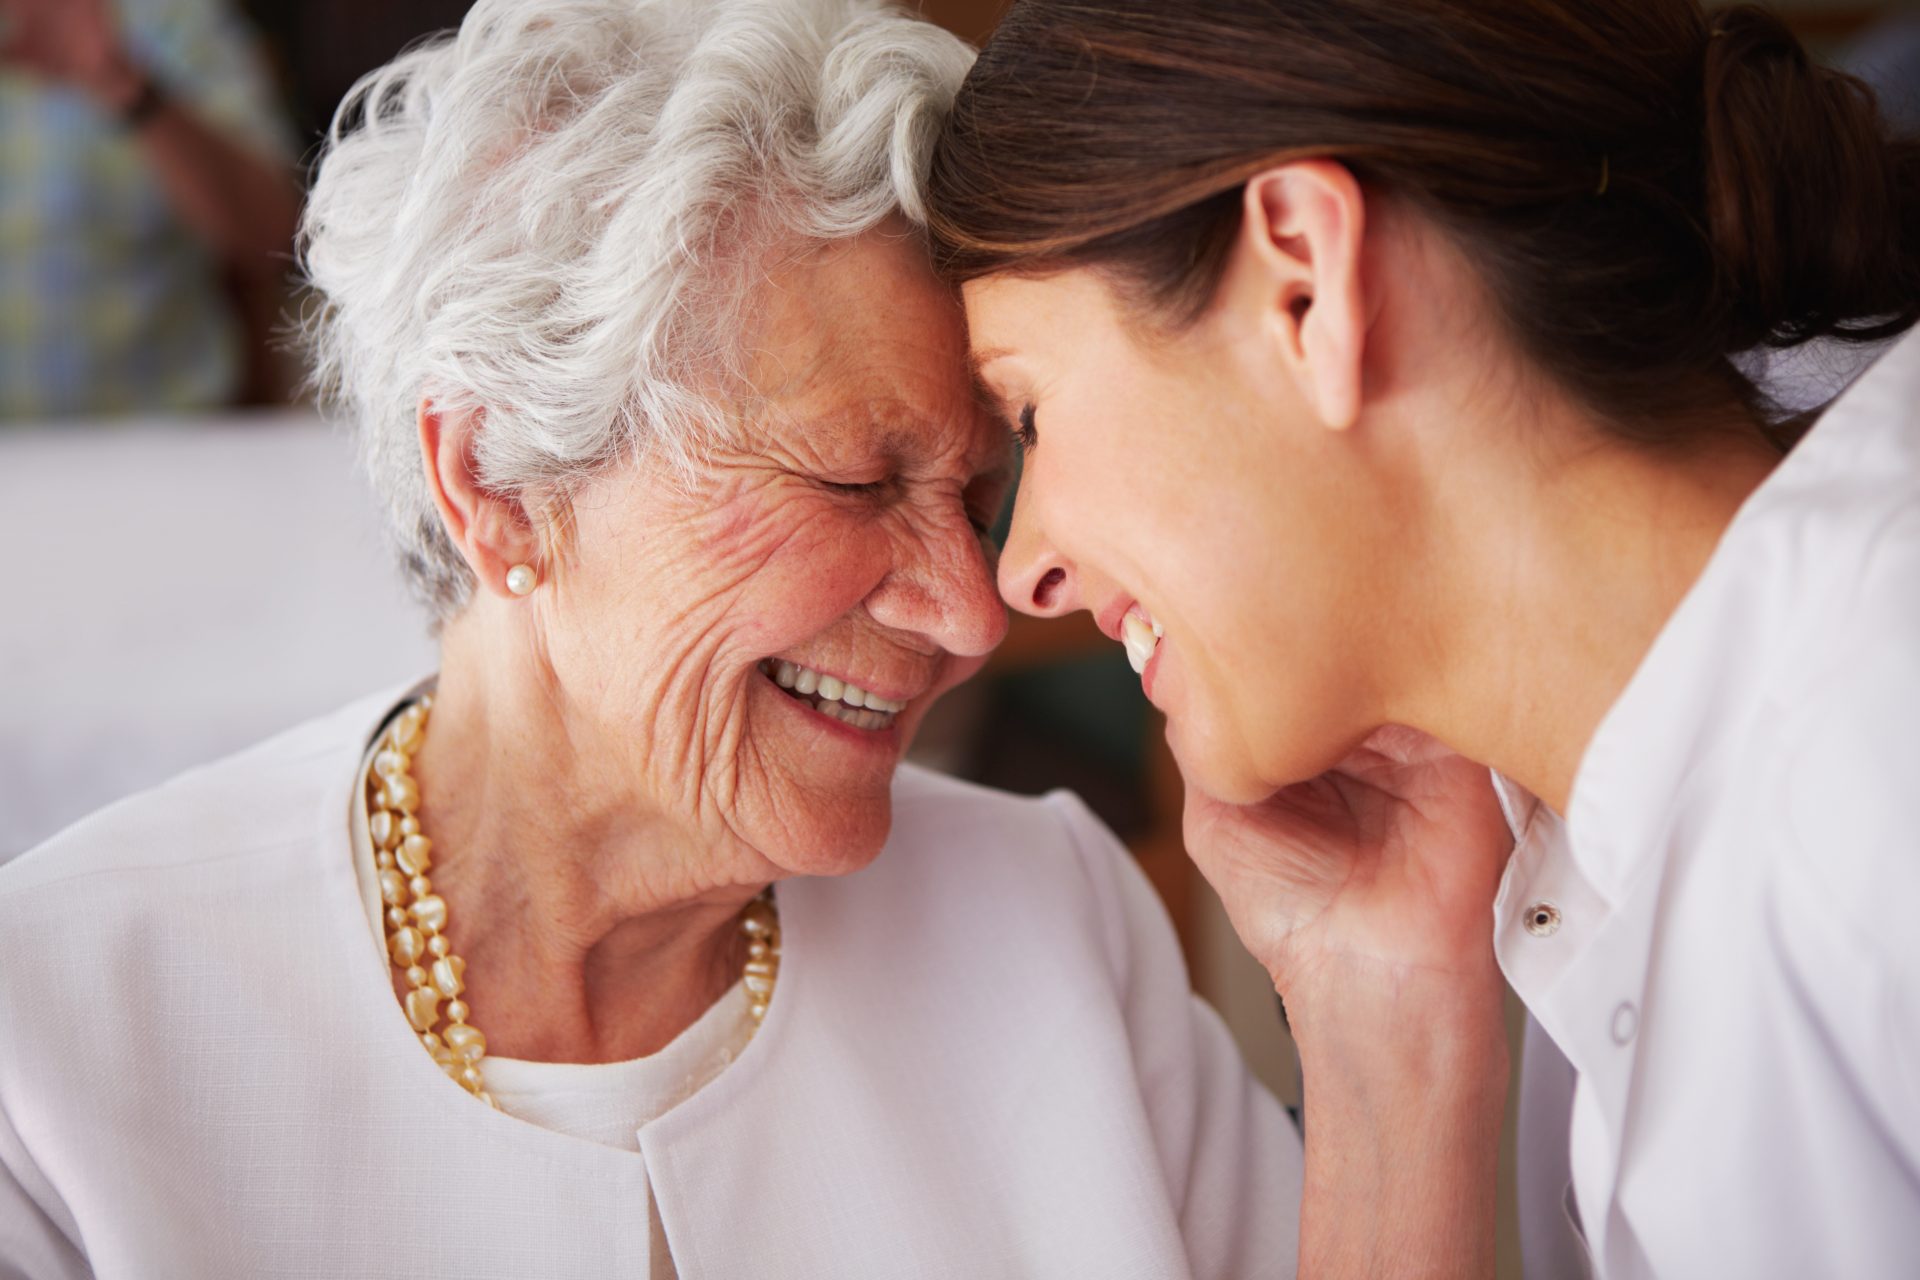 Smiling elderly woman and caregiver sharing a joyful, close moment together.